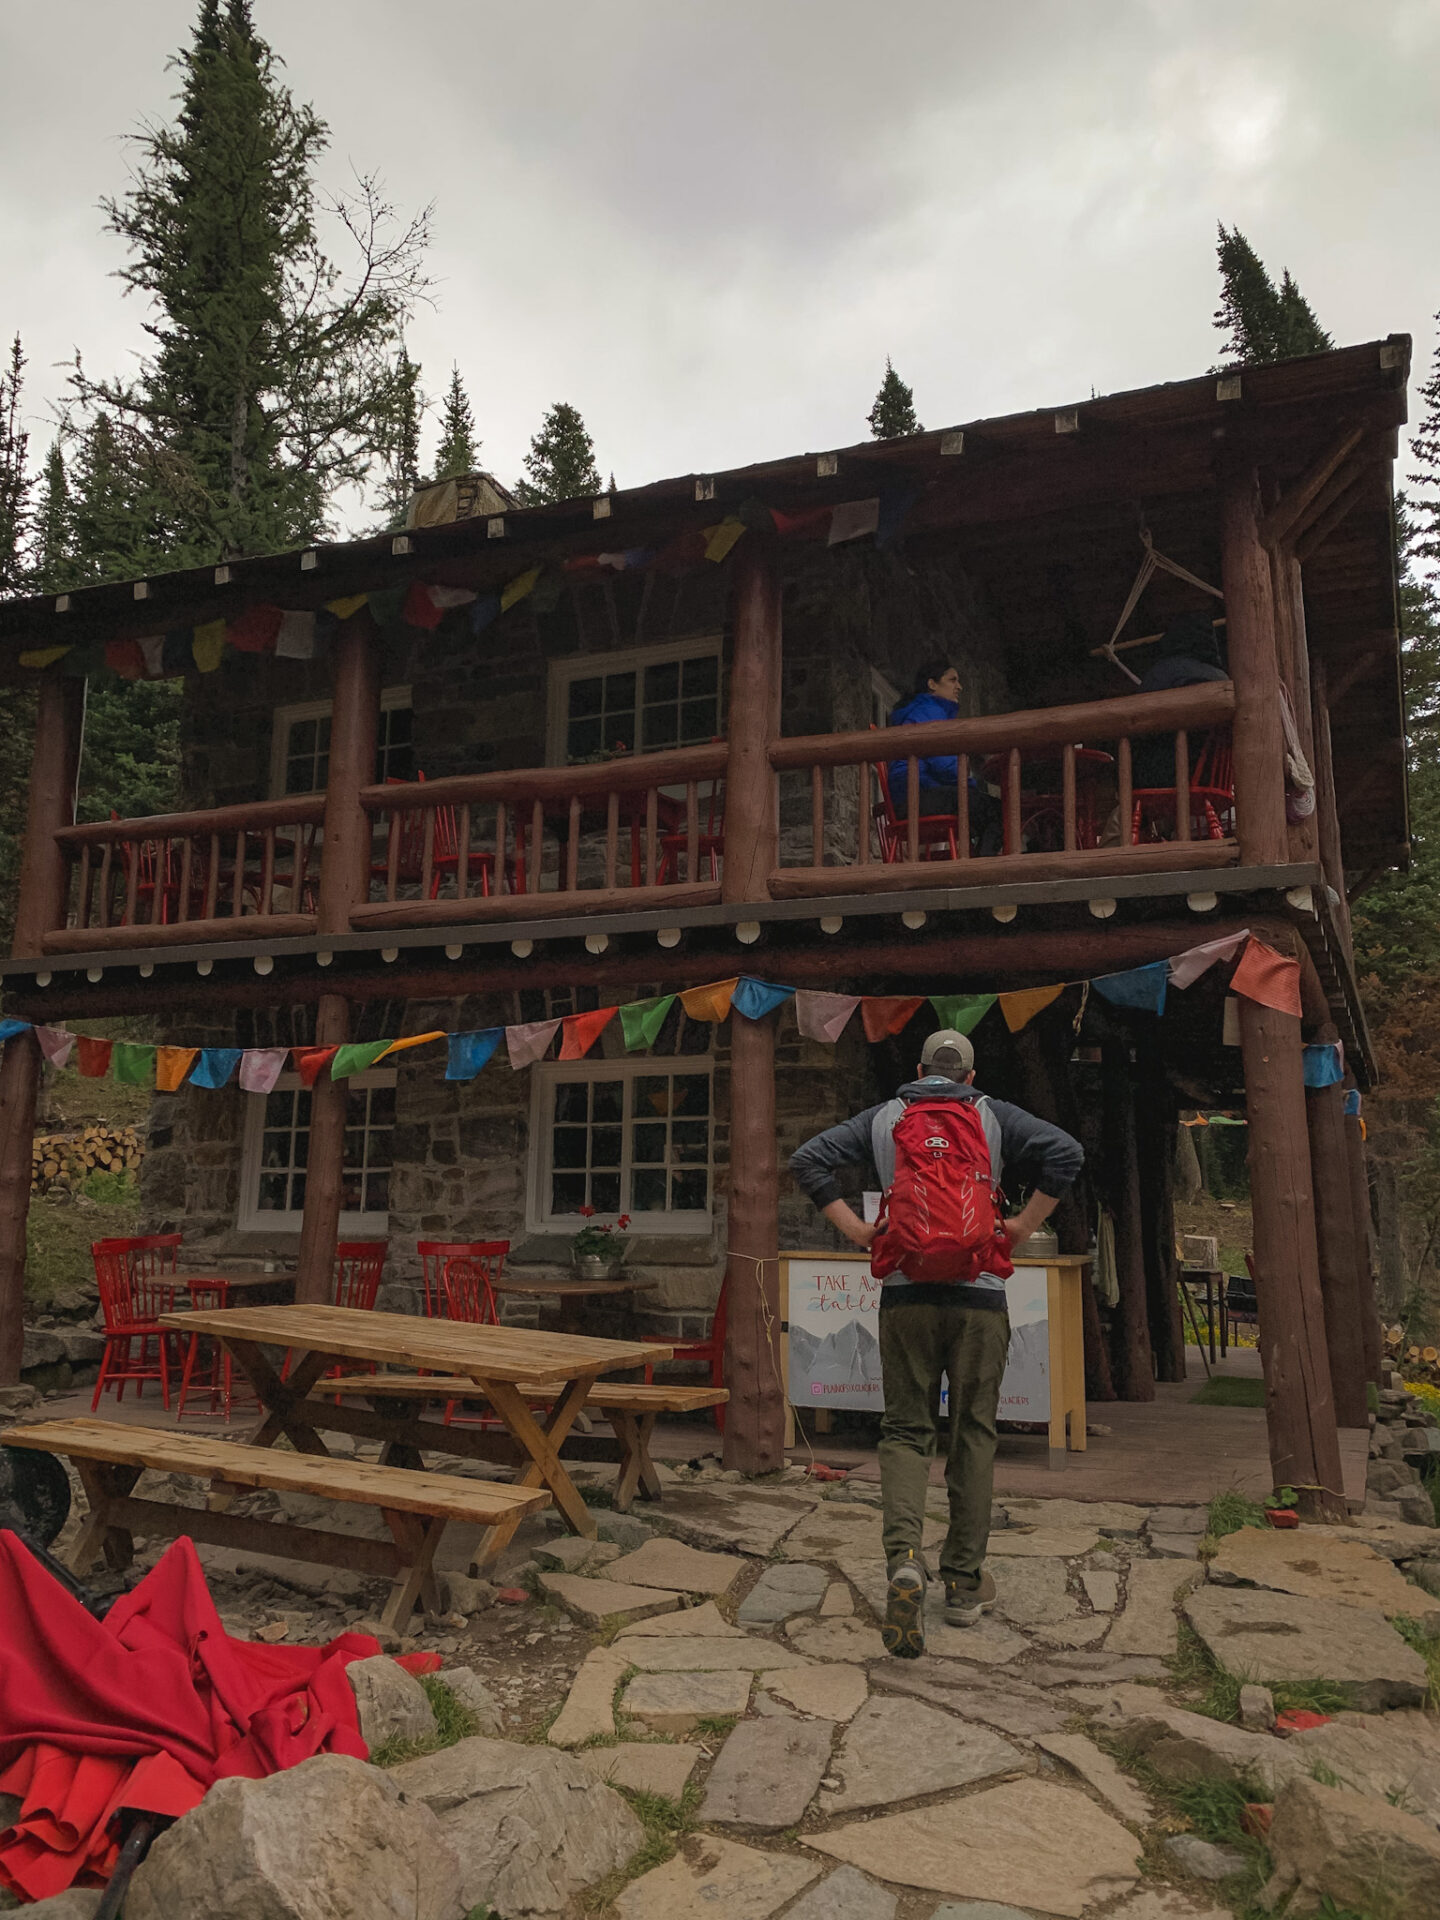 Plain of the Six Glaciers Teahouse in Lake Louise, Alberta